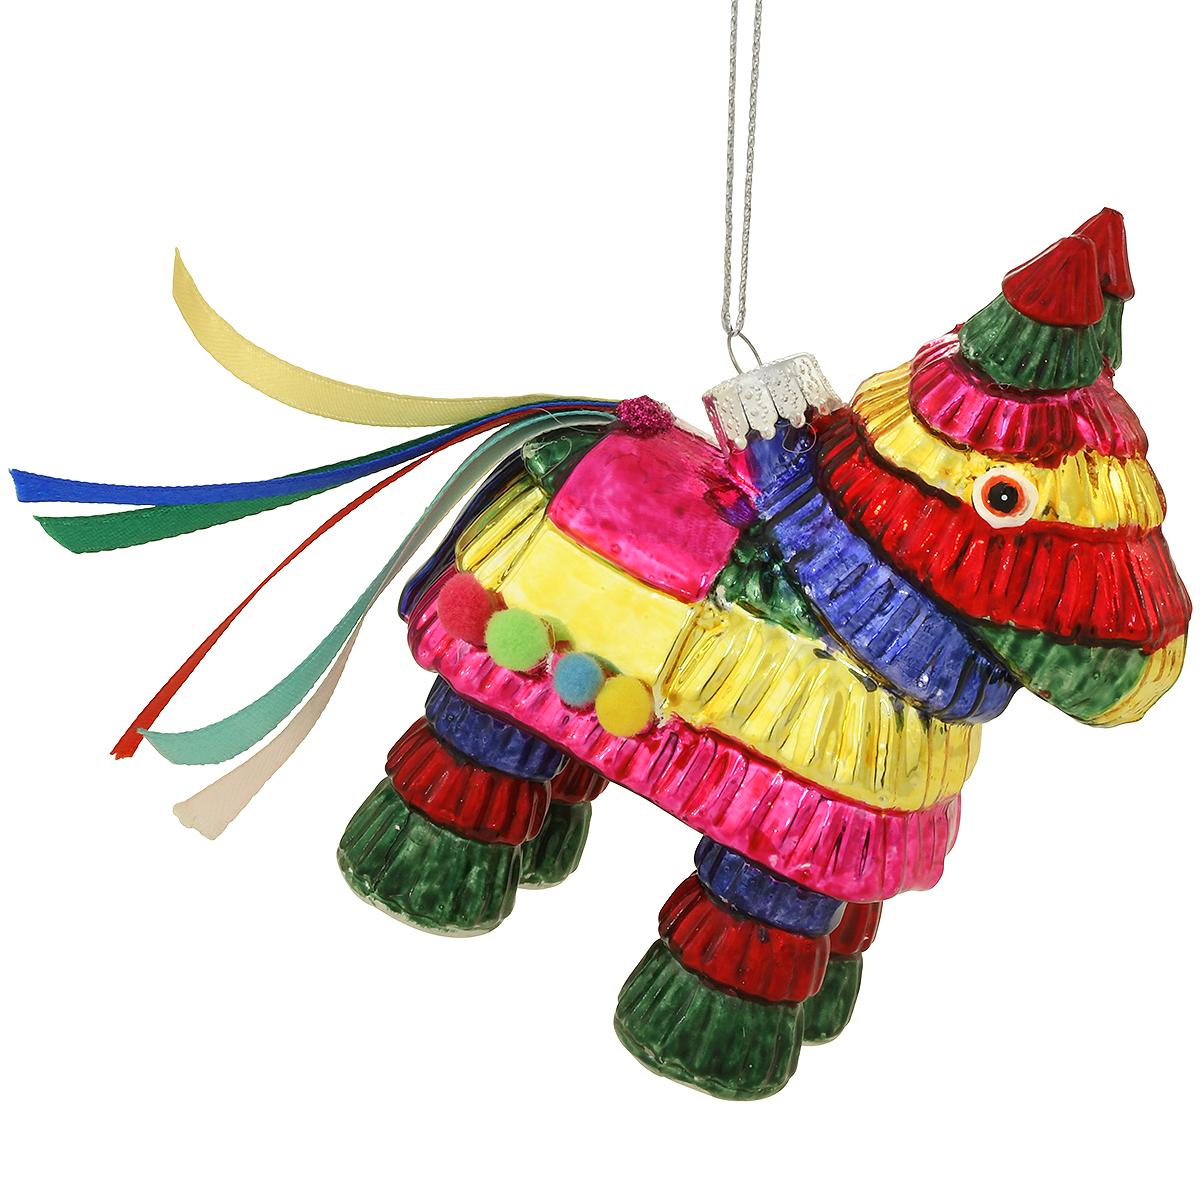 Piñata Glass Ornament With Ribbons